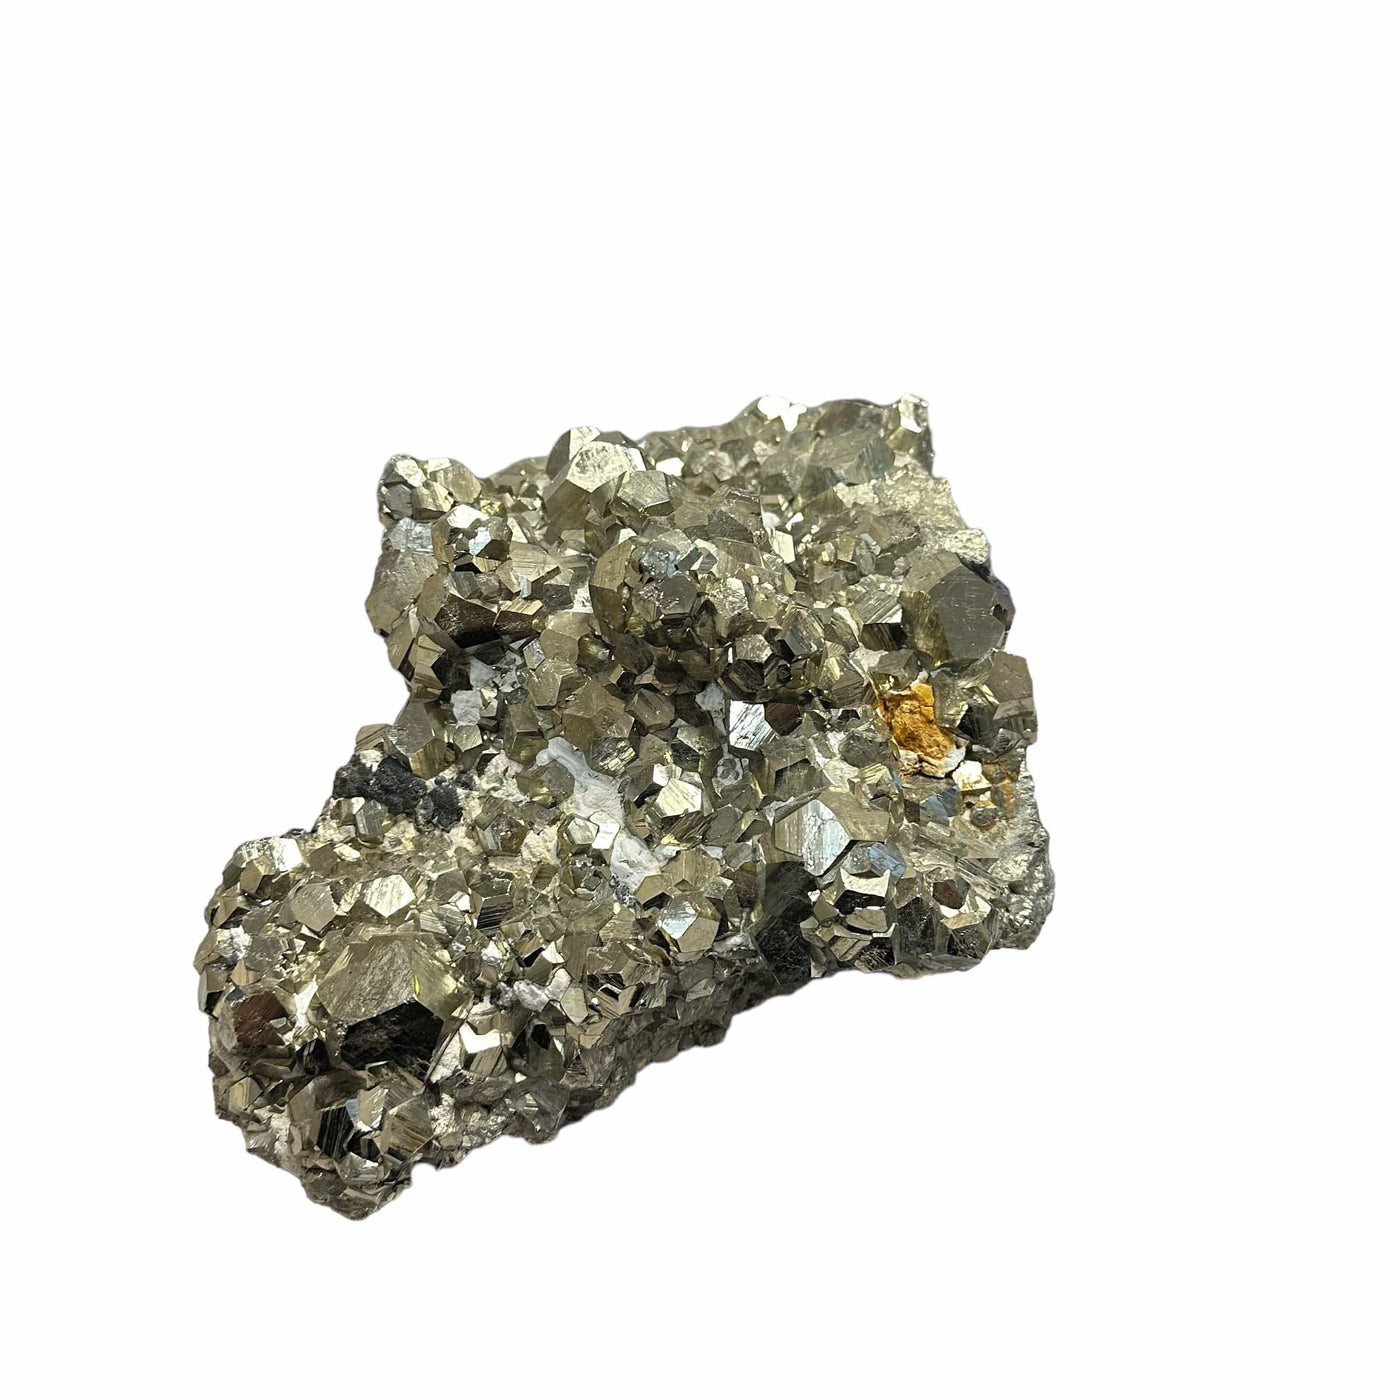 Large Pyrite cluster with Hexagon formations - Collectors Piece! -